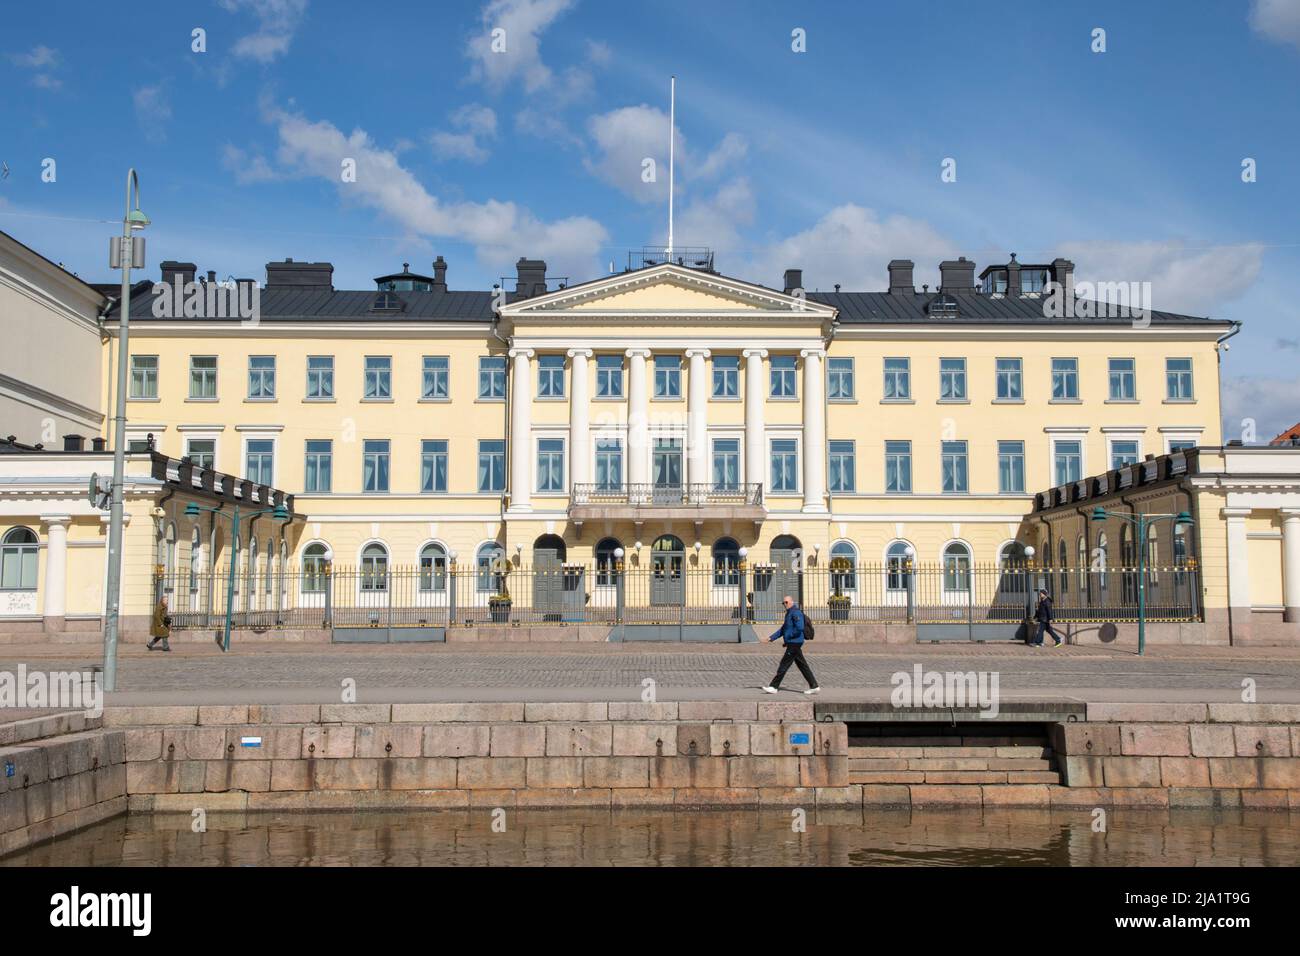 The Presidential palace in Helsinki, Finland Stock Photo